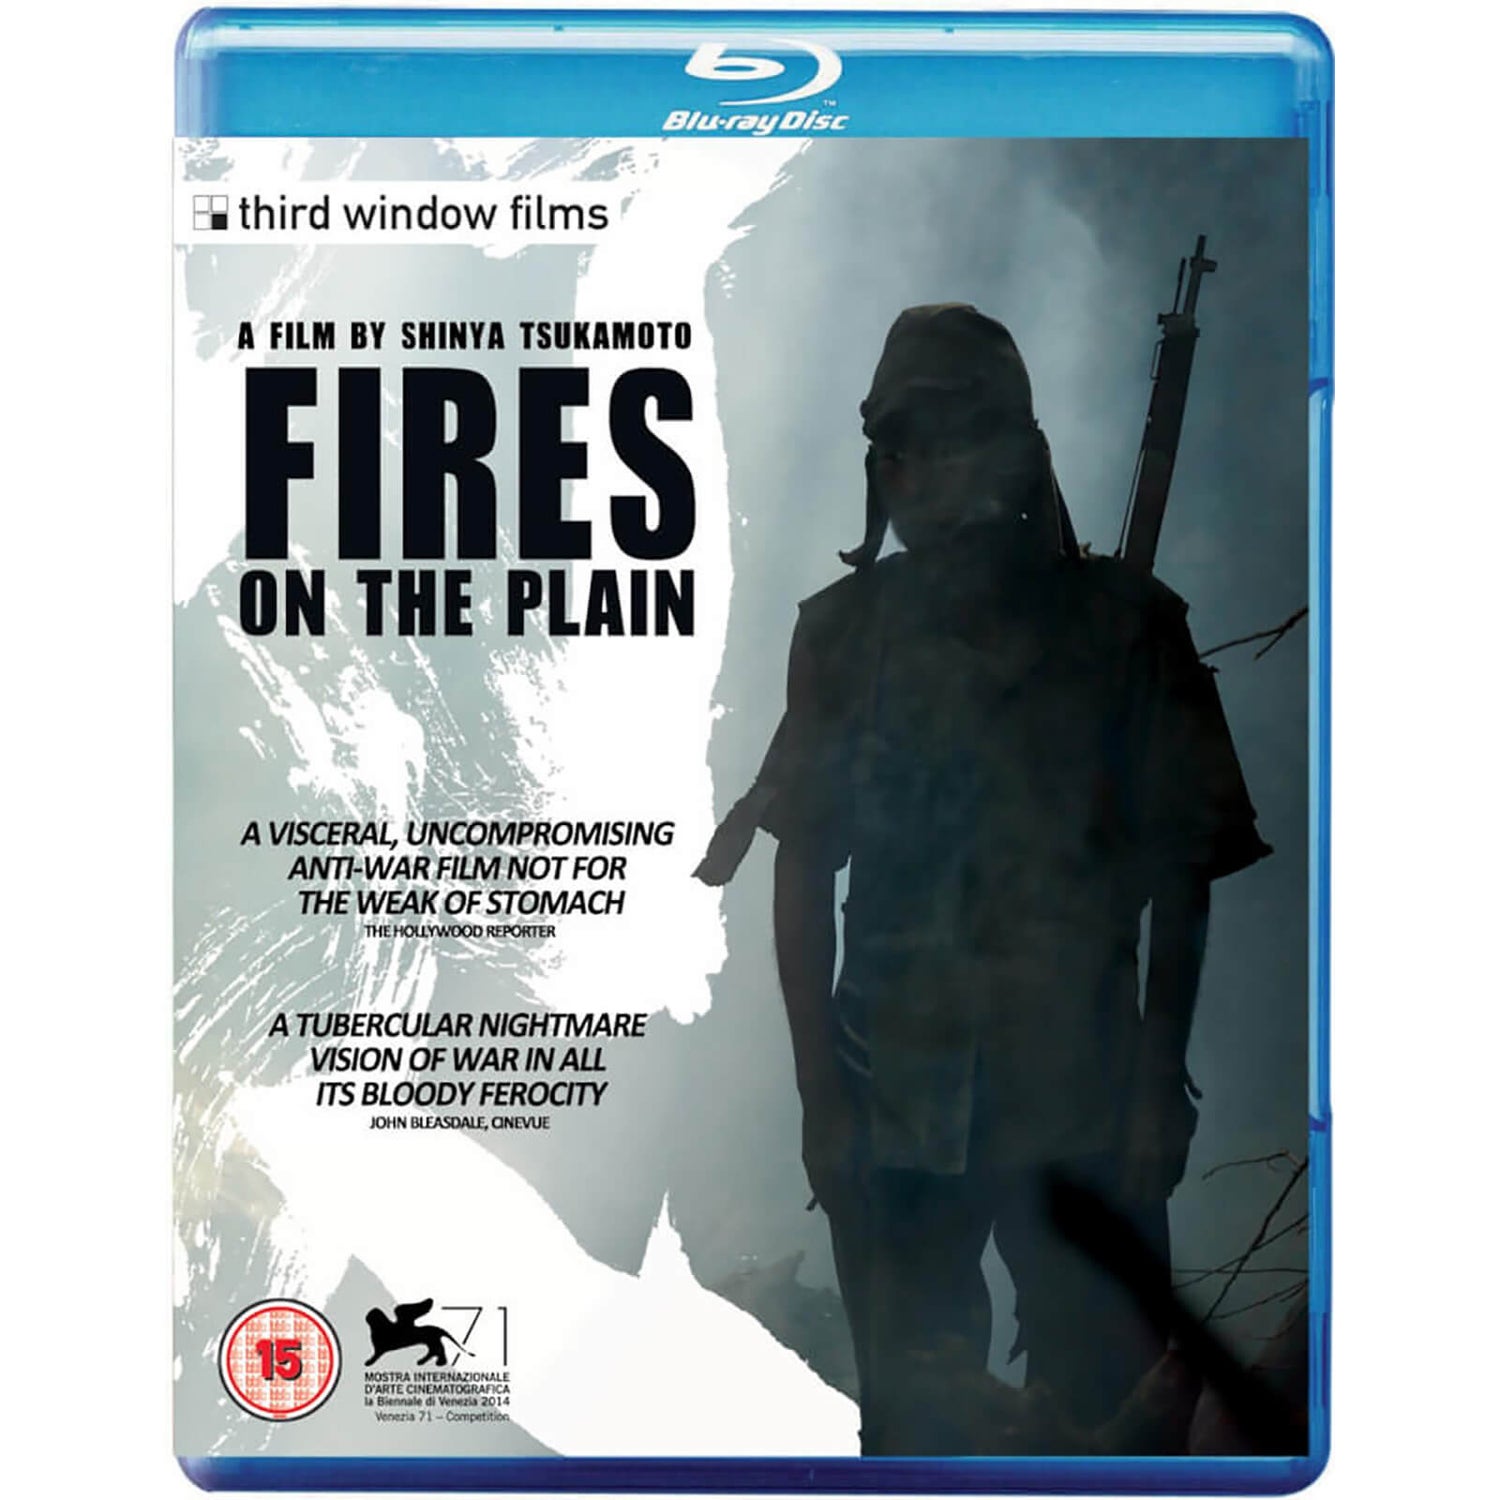 Fires On The Plain (Dual Format)